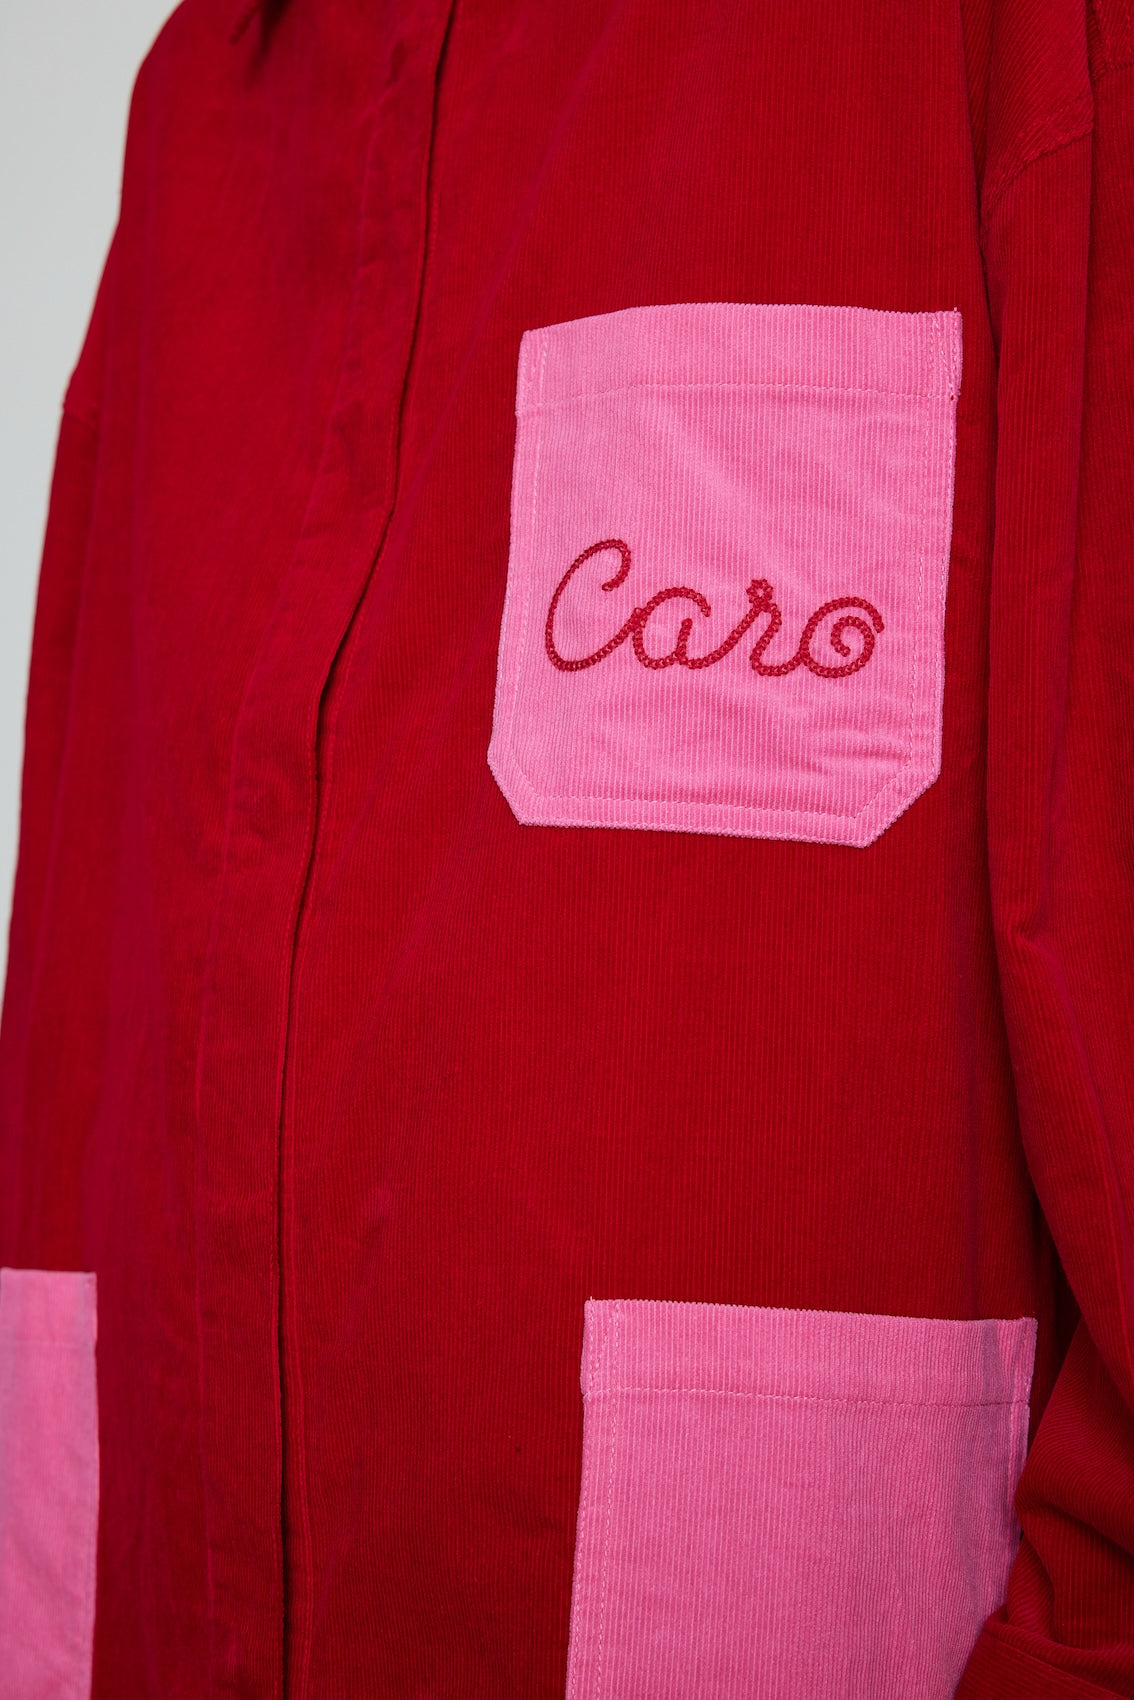 Caro Editions Frederik Shirt is an oversized cotton corduroy style with big sleeves, pink pockets, and an embroidered Caro logo. Style it open over a dress, tank top, or t-shirt, or wear it buttoned-up.